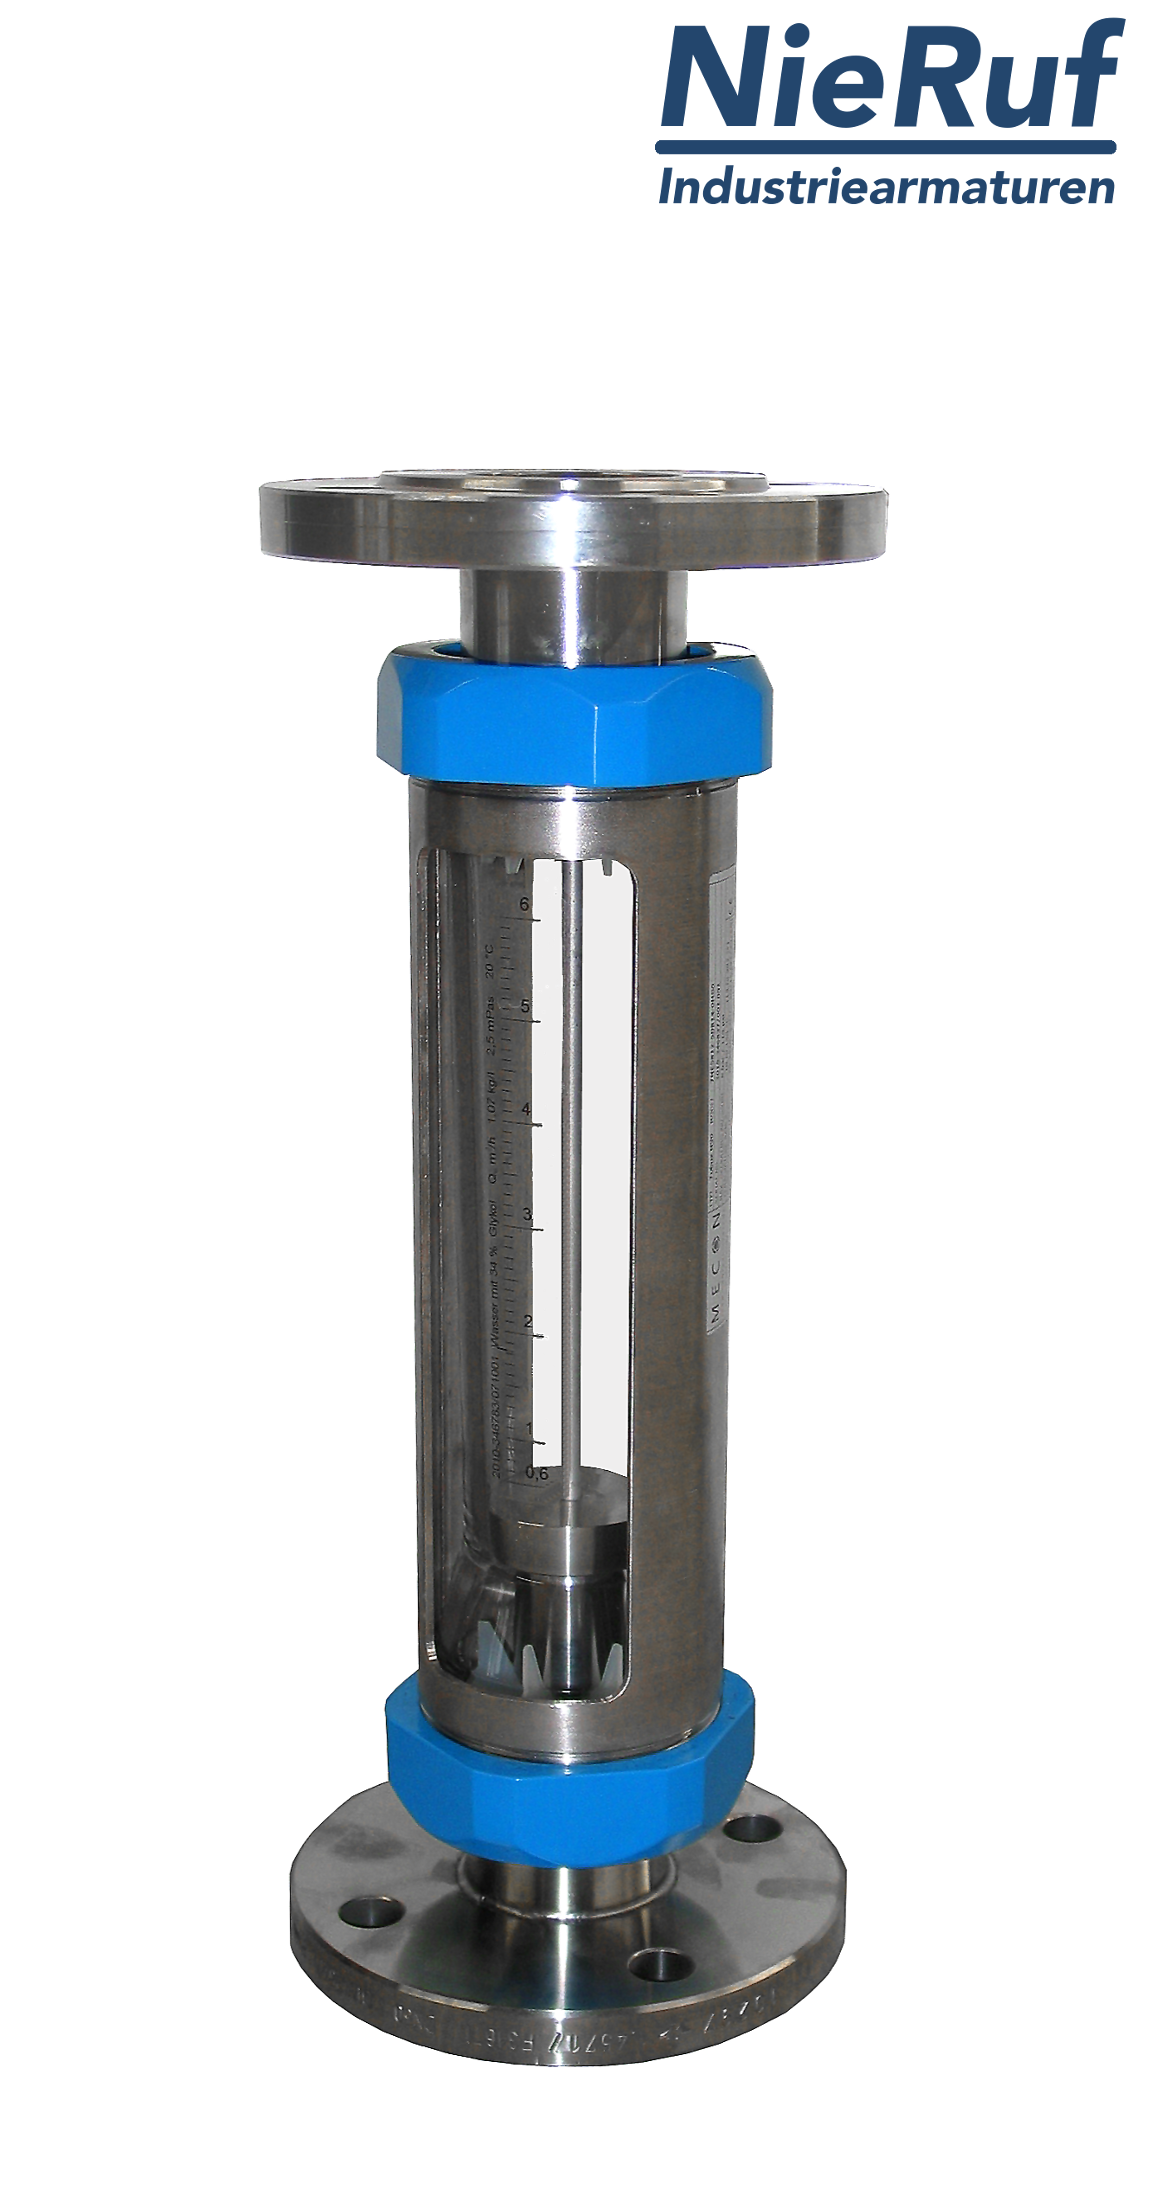 Variable area flowmeter stainless steel + borosilicate flange DN25 65.0 - 650 l/h water FKM